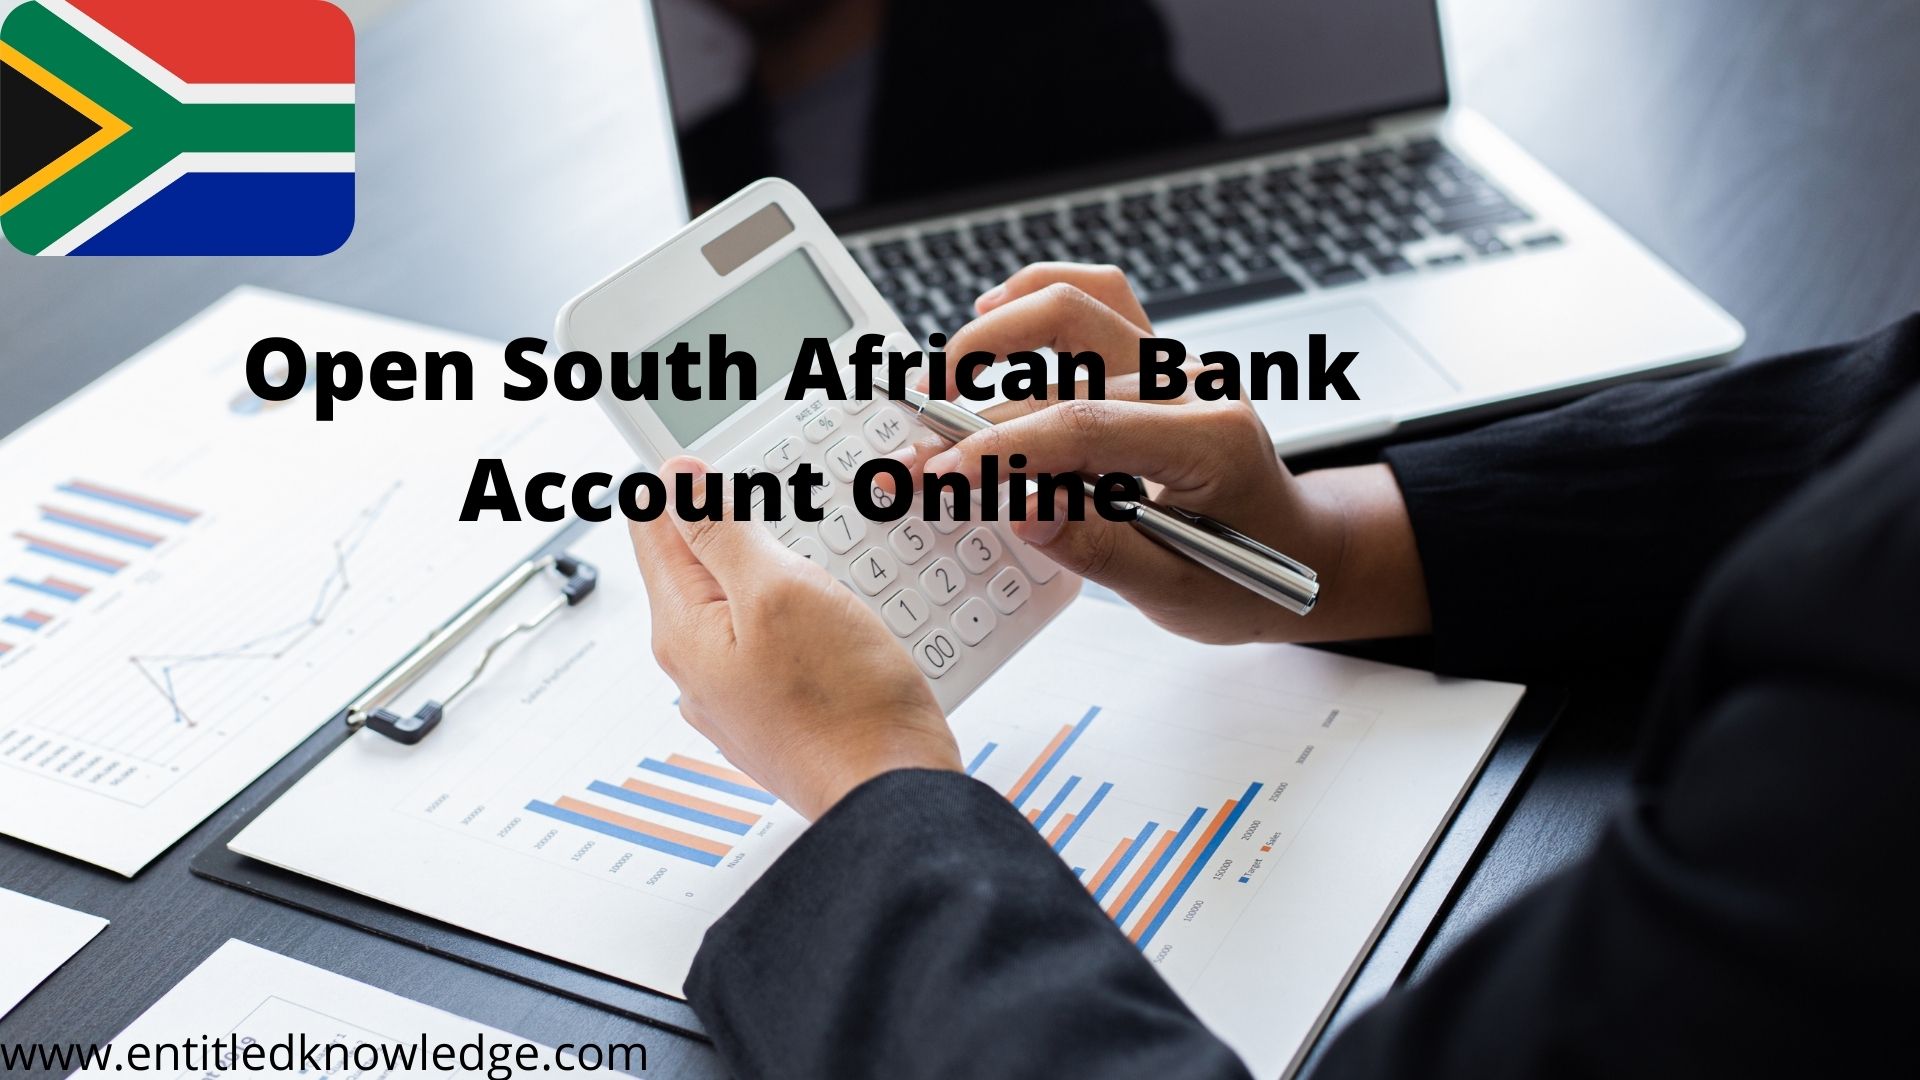 Open South African Bank Account Online For Residents/Non-Residents